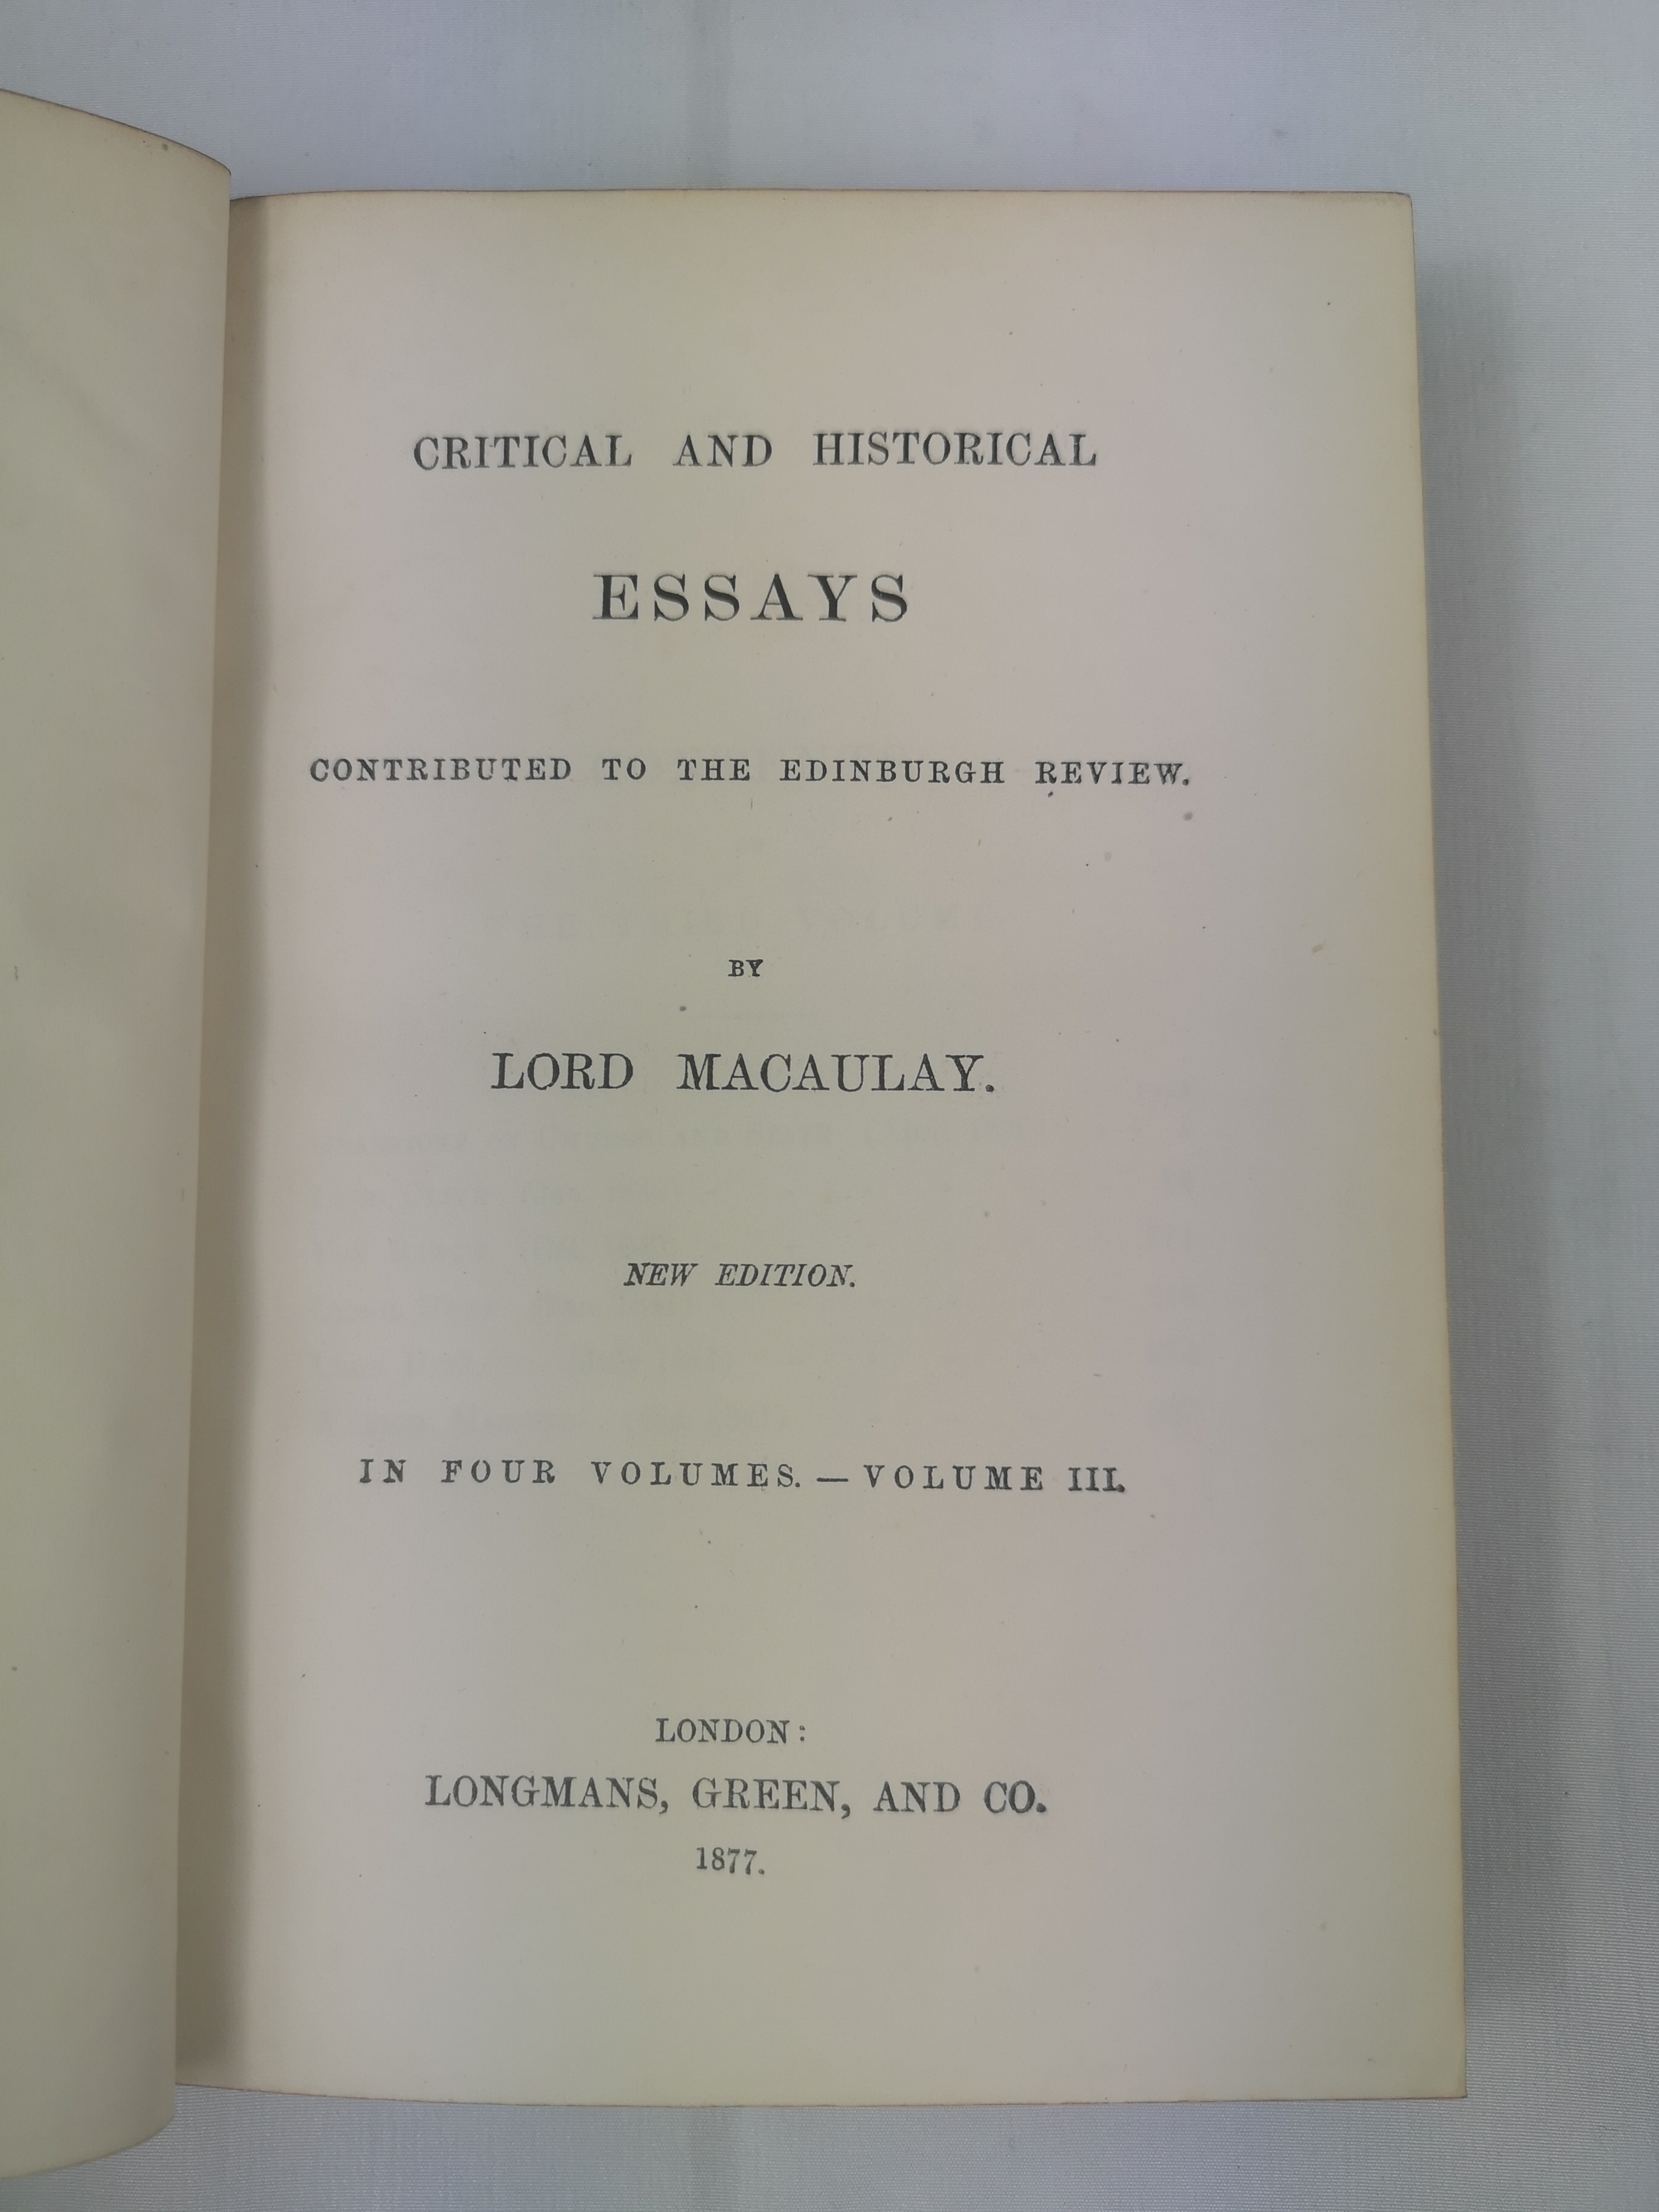 Critical and Historical Essays by Lord Macaulay - Image 3 of 5